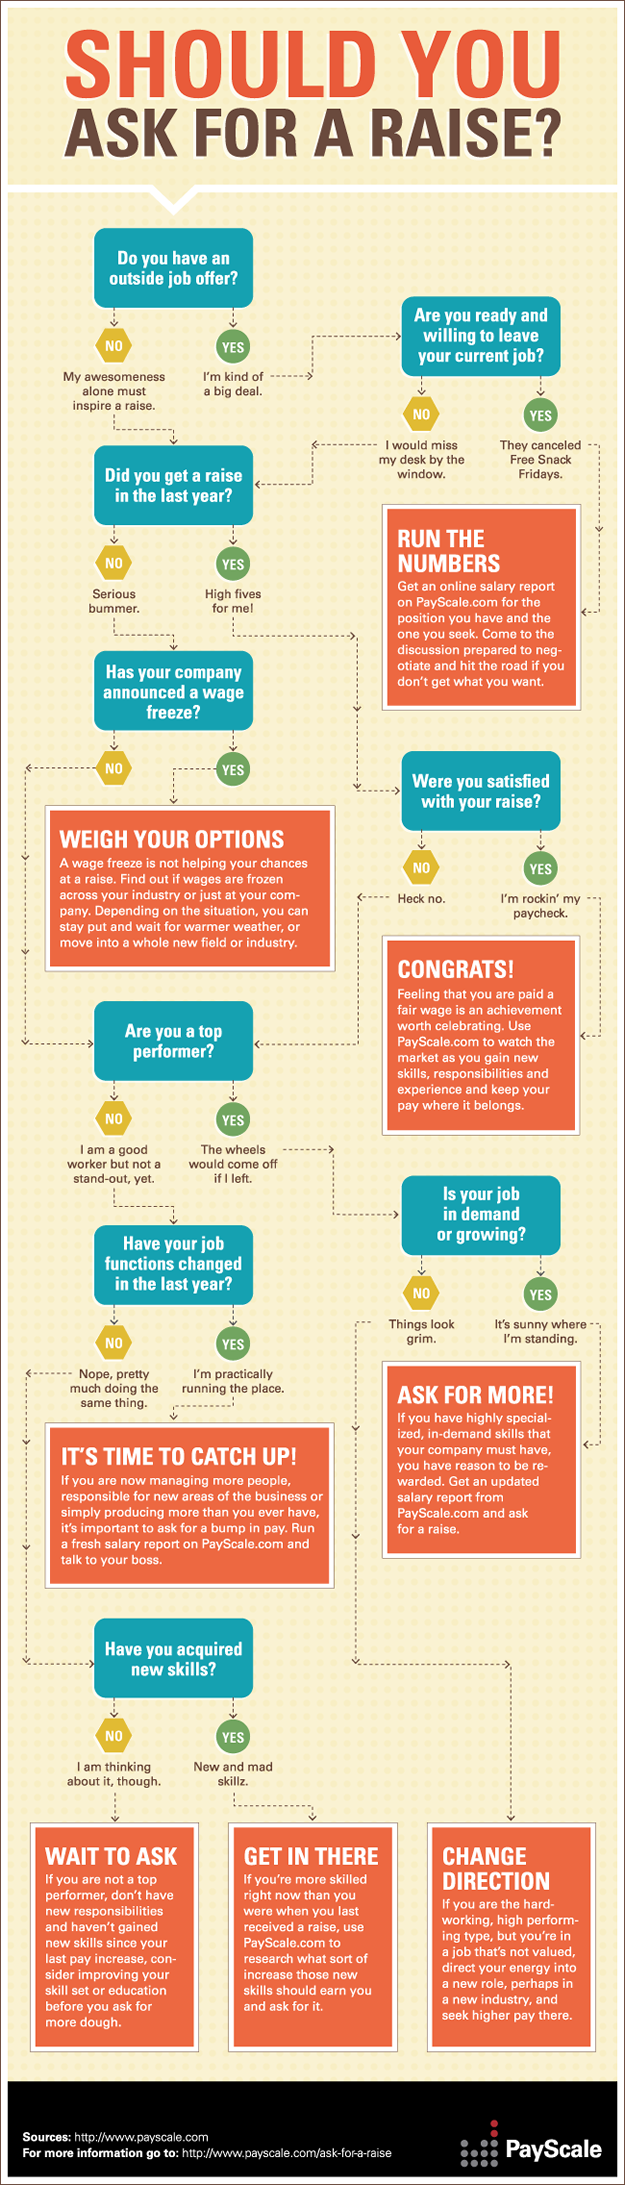 Should You Ask for a Raise? [infographic]